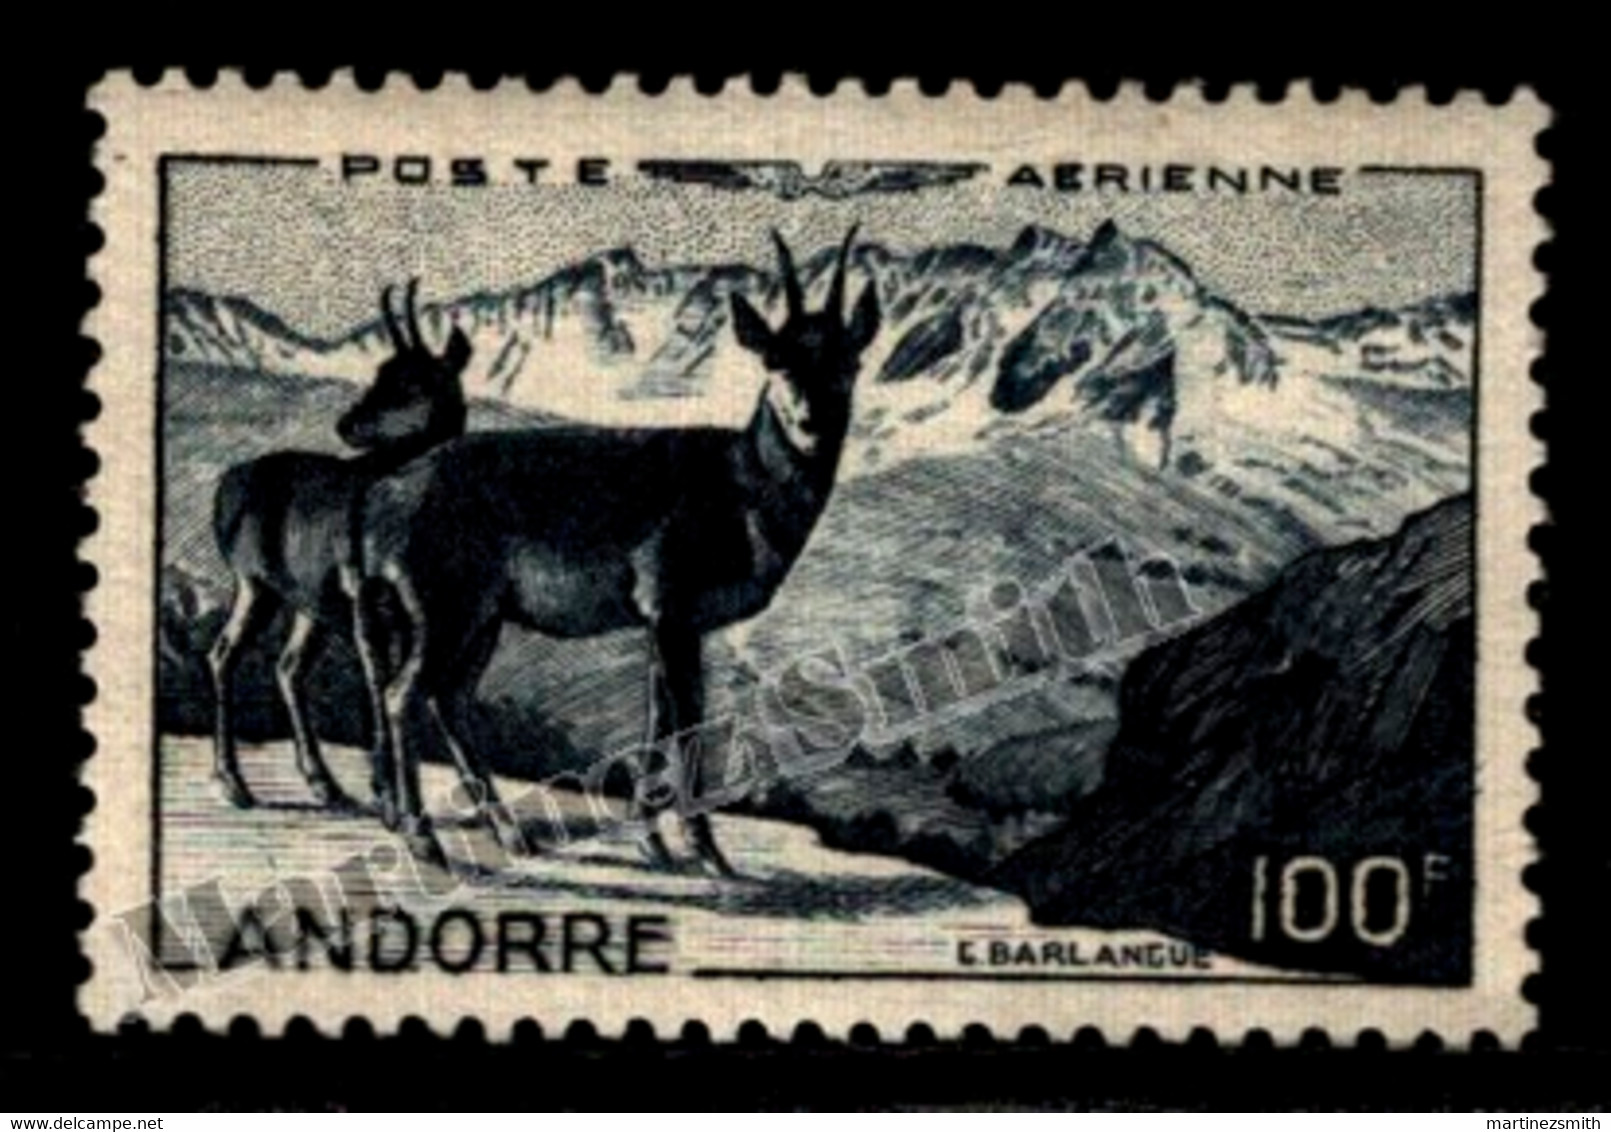 Andorre Français / French Andorra 1950 Airmail Yv. 1, Nature Landscape, Fauna, Isards - MNH - Airmail